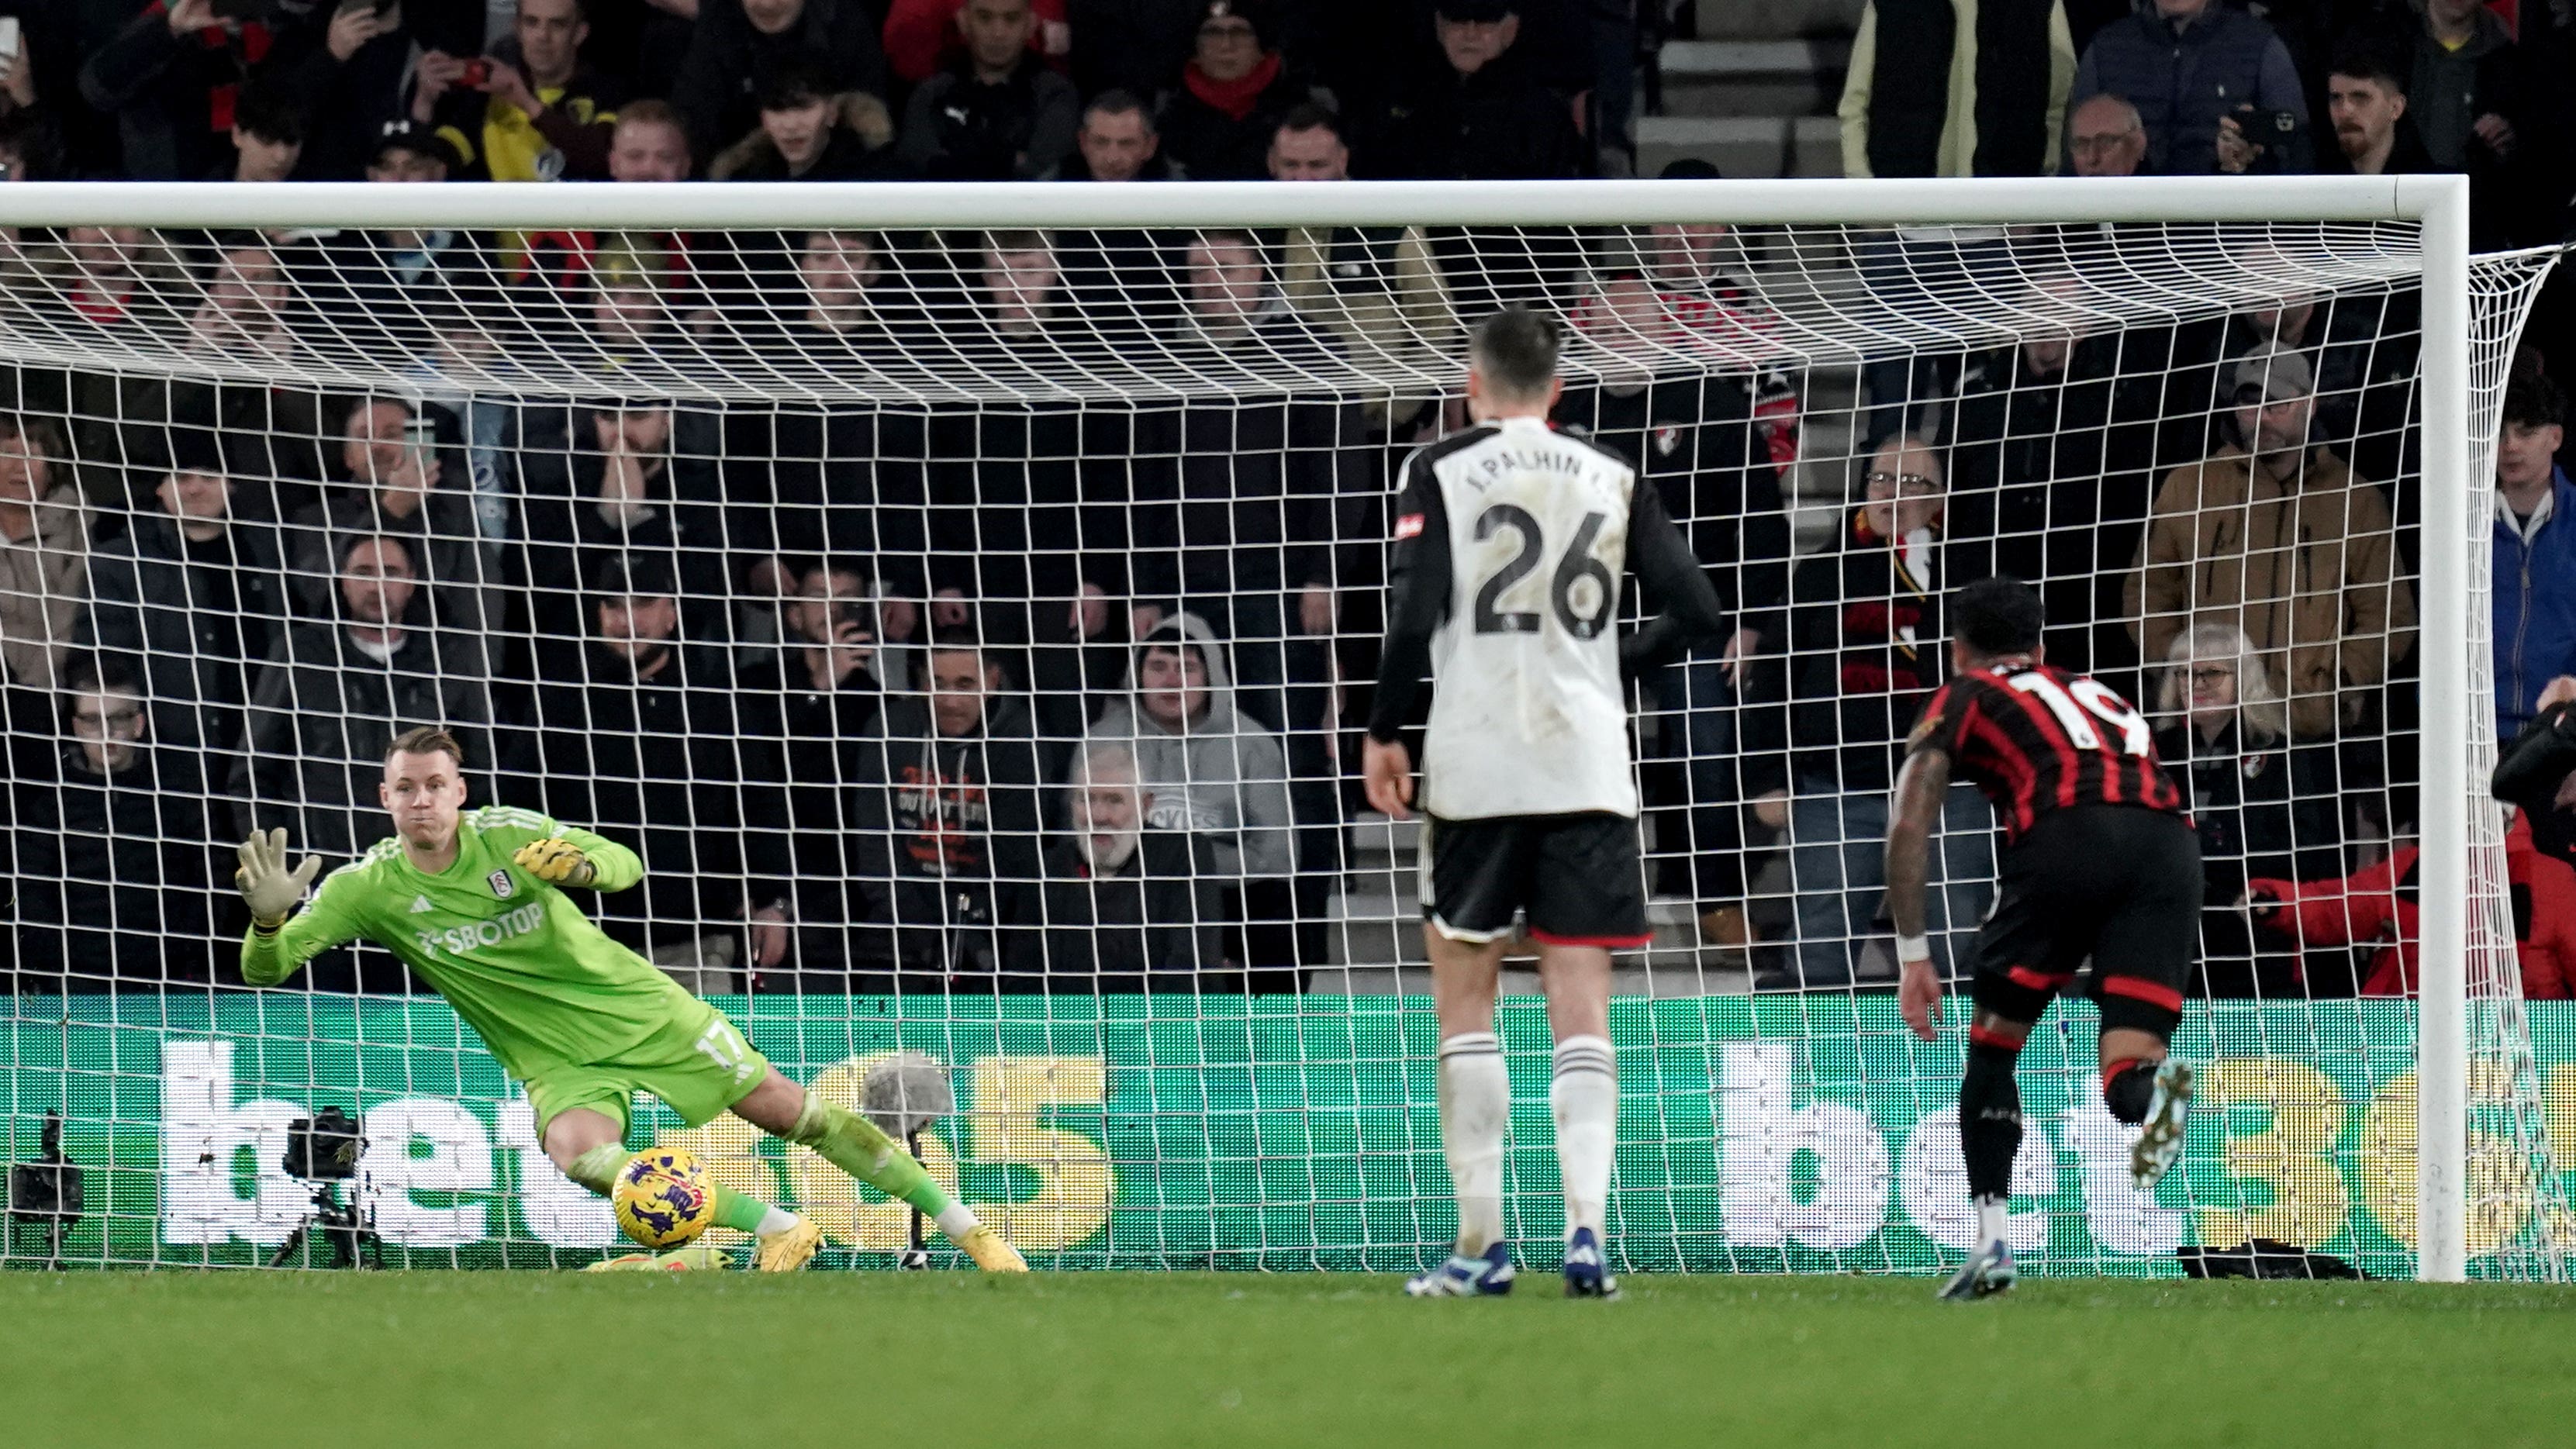 Dominic Solanke continues fine scoring form as Bournemouth cruise past Fulham